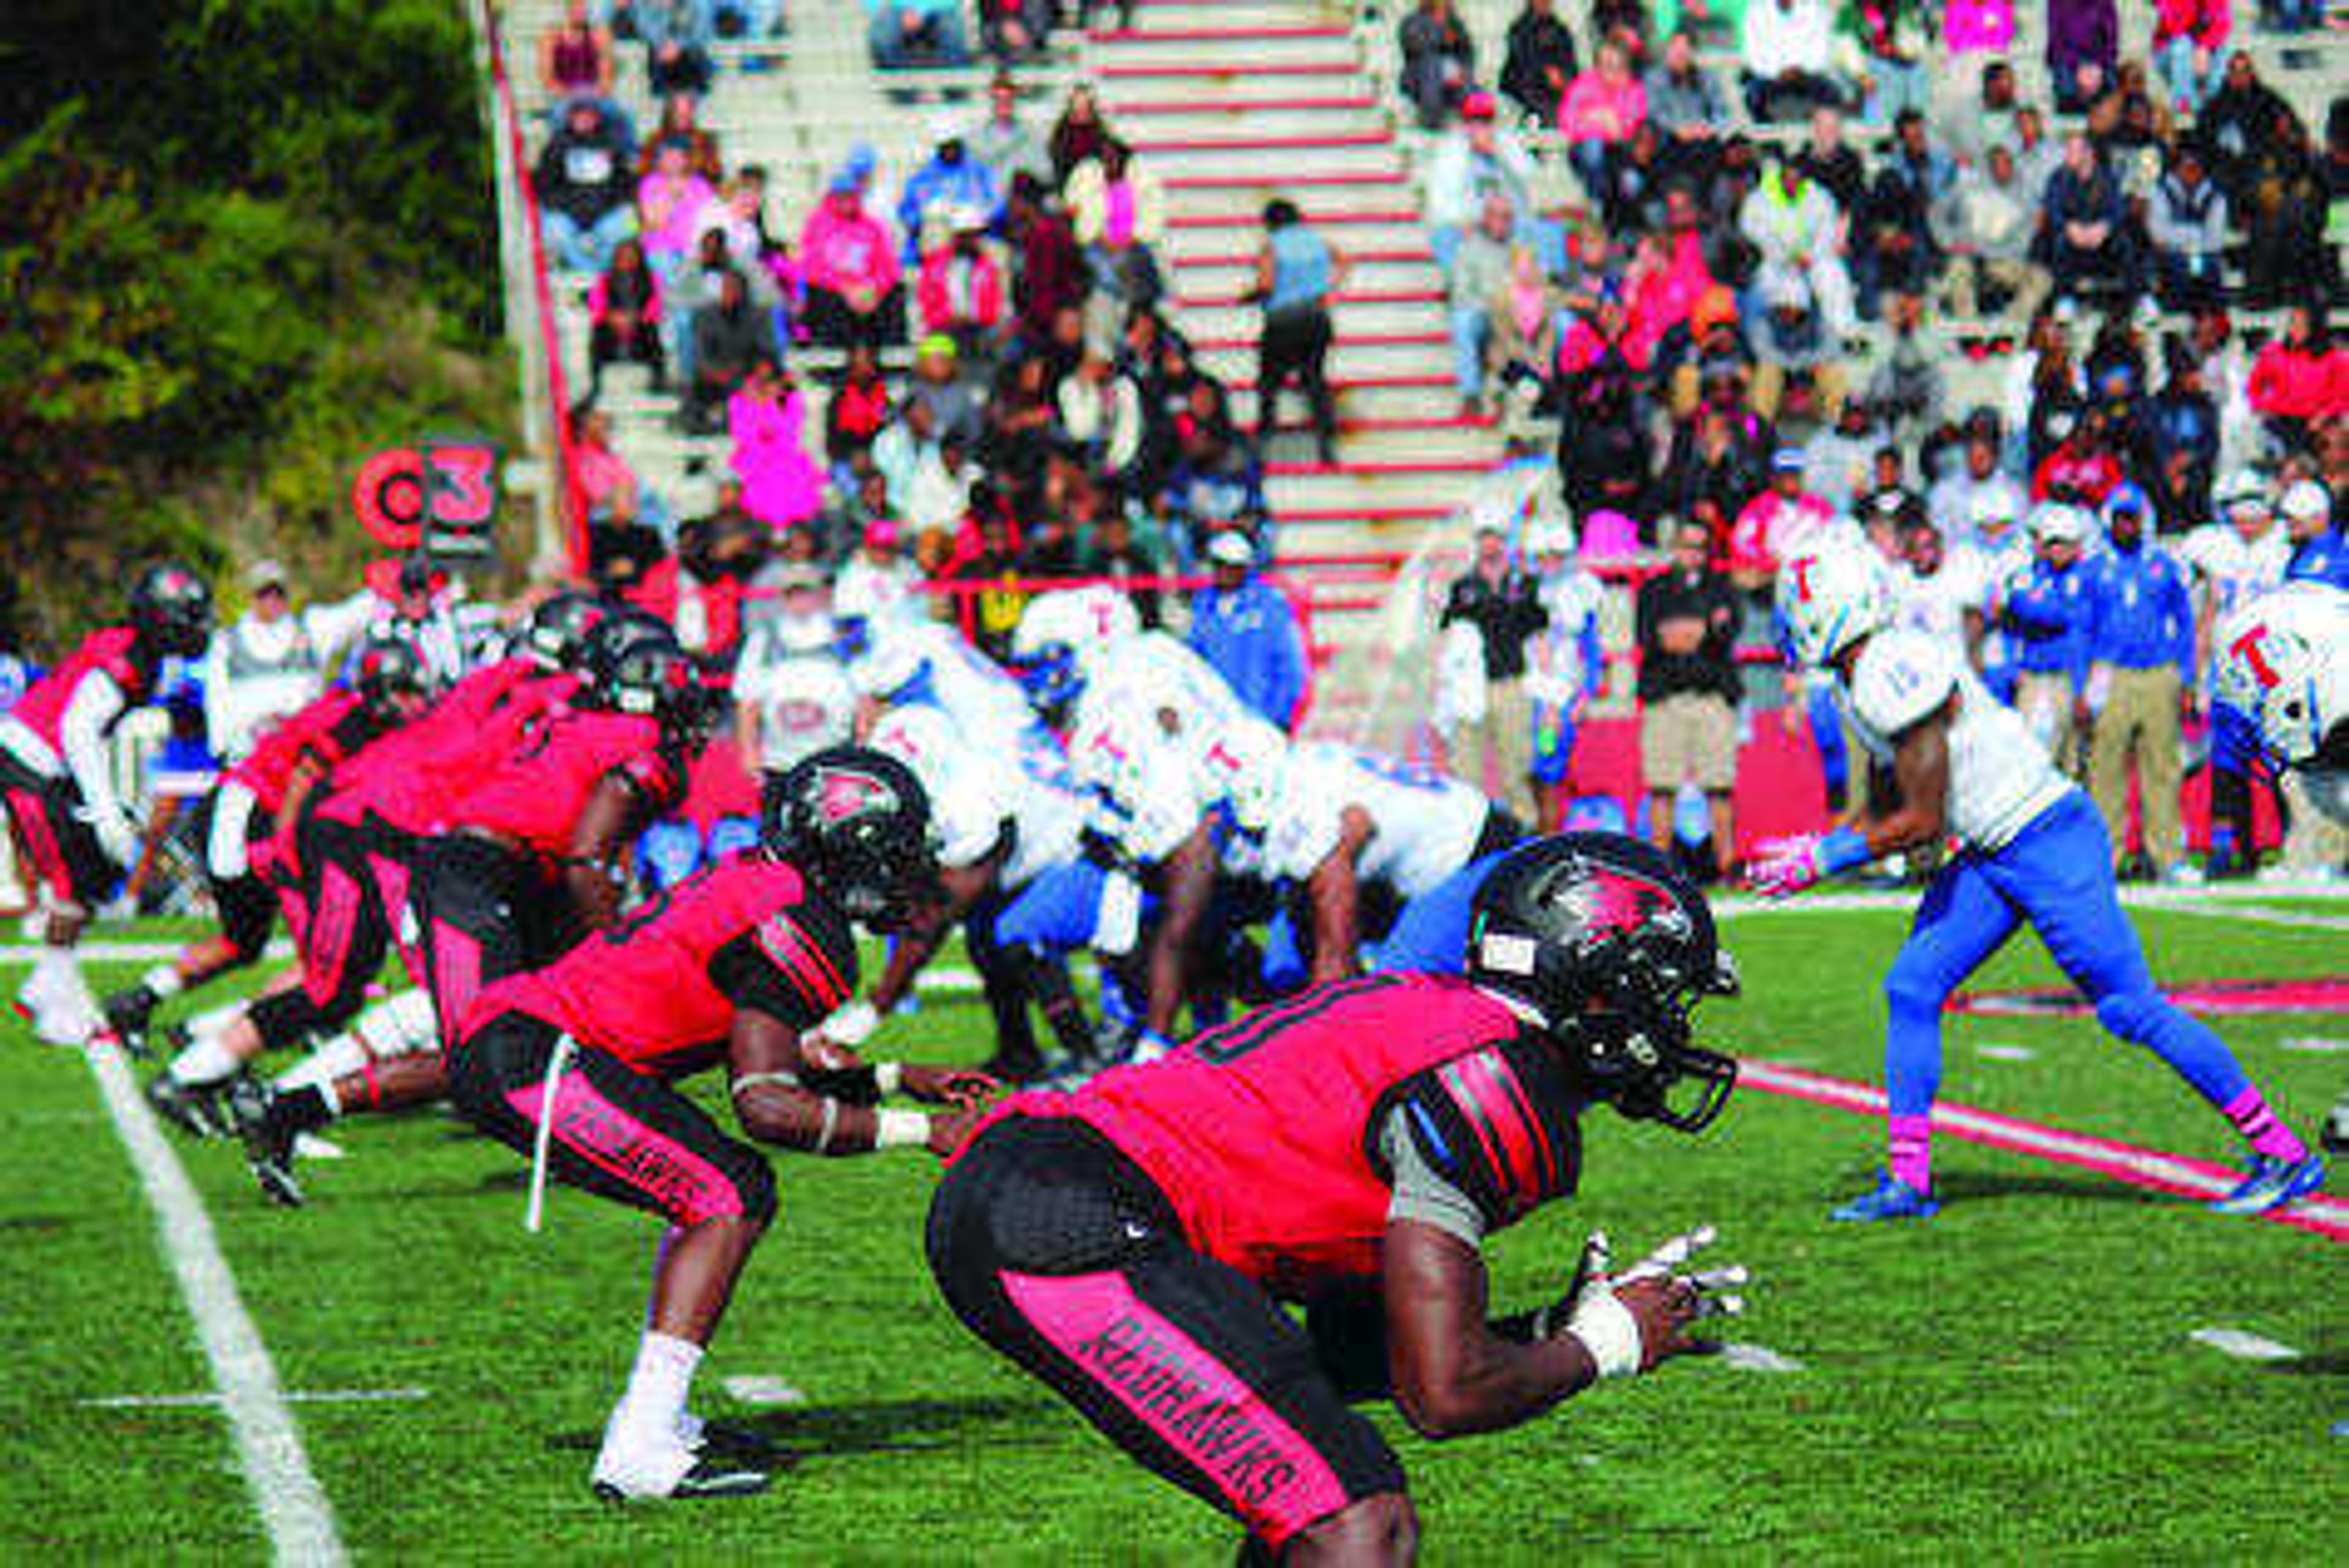 The Redhawks beat the No. 20 Tennessee State Tigers 28-21 on Saturday. Photo by Julian Sanders